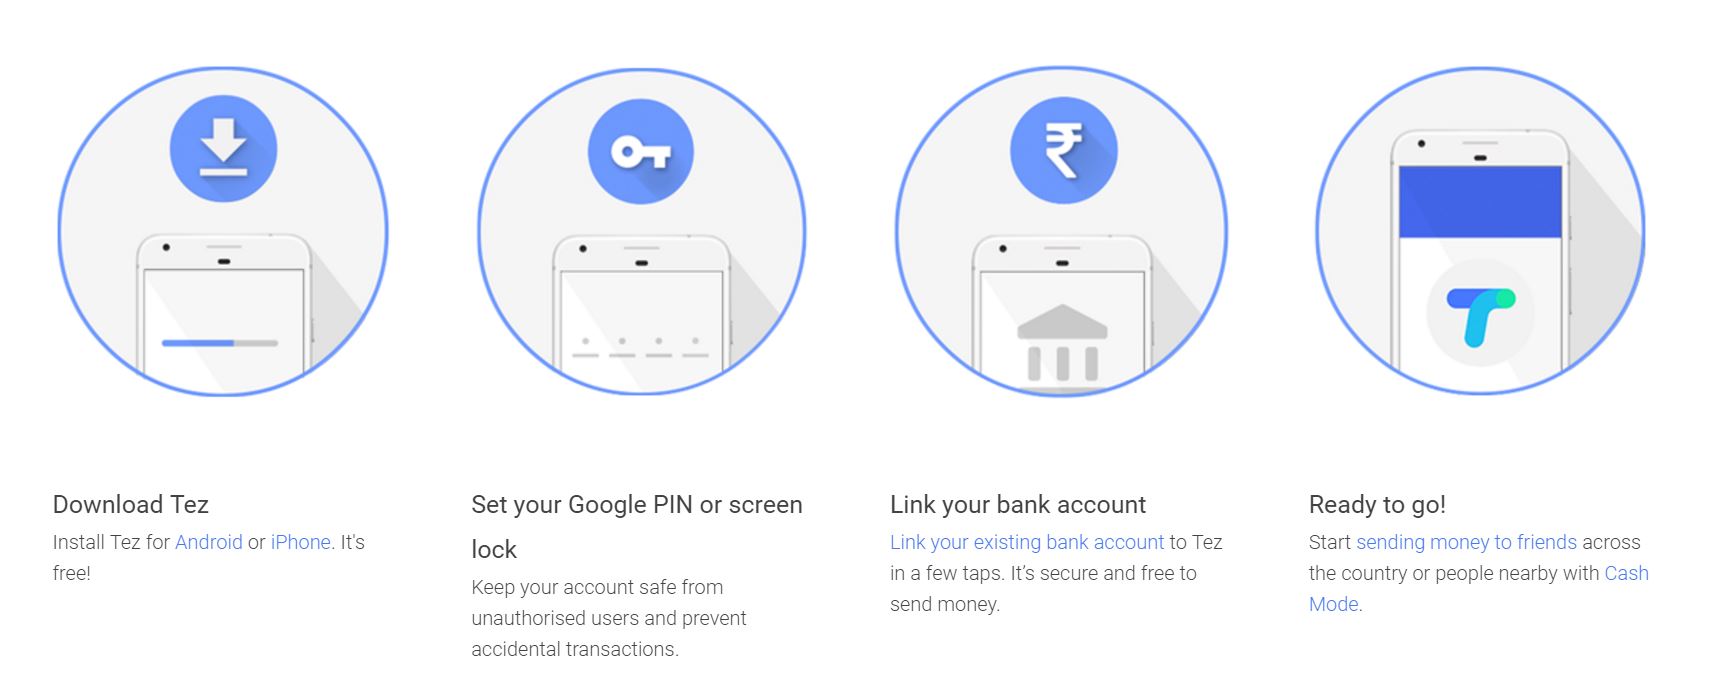 How to make payments using Google’s Tez app